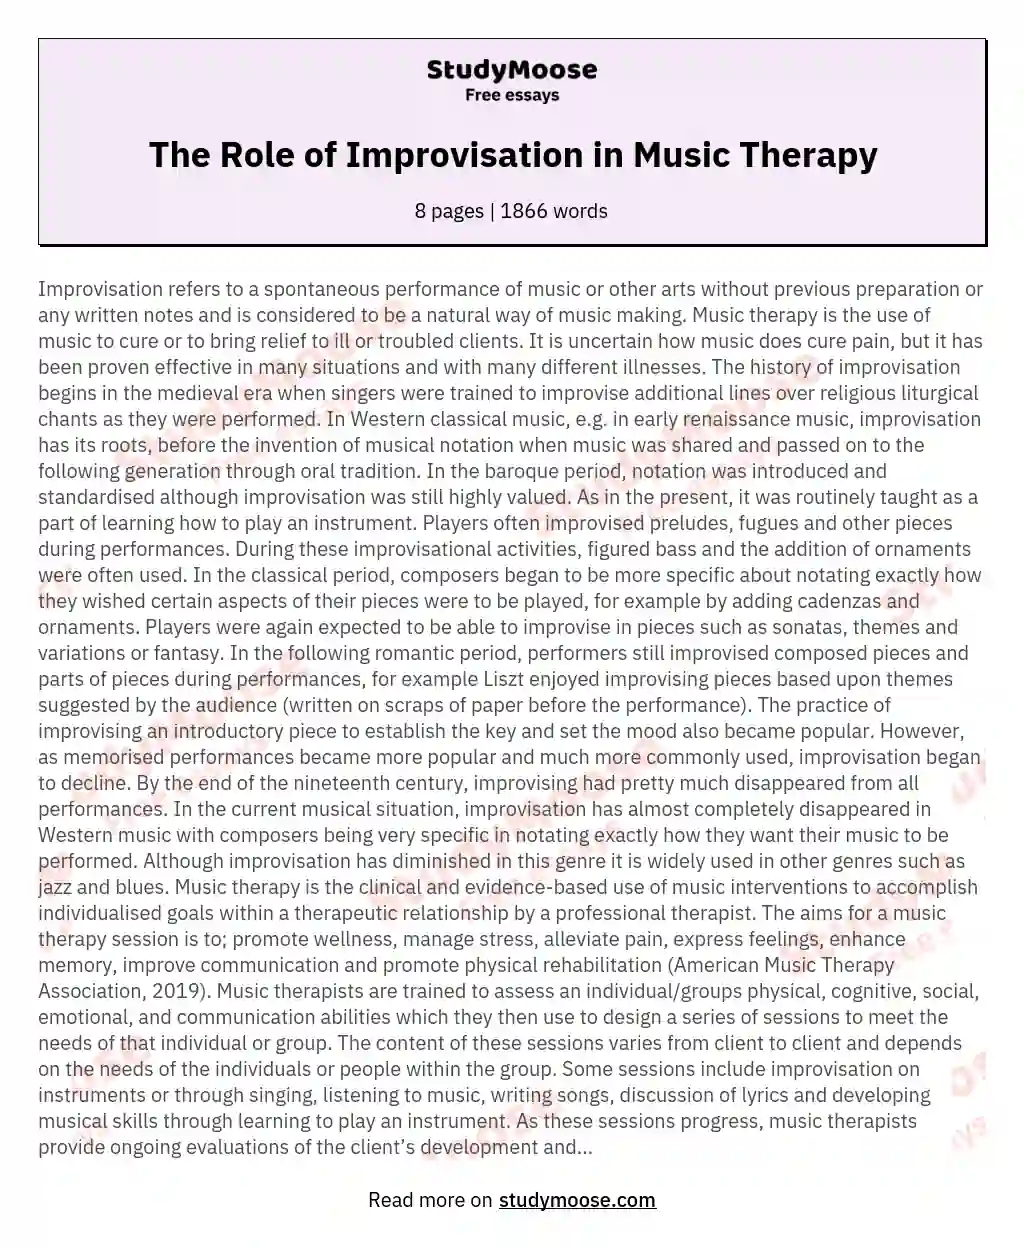 music therapy essay conclusion